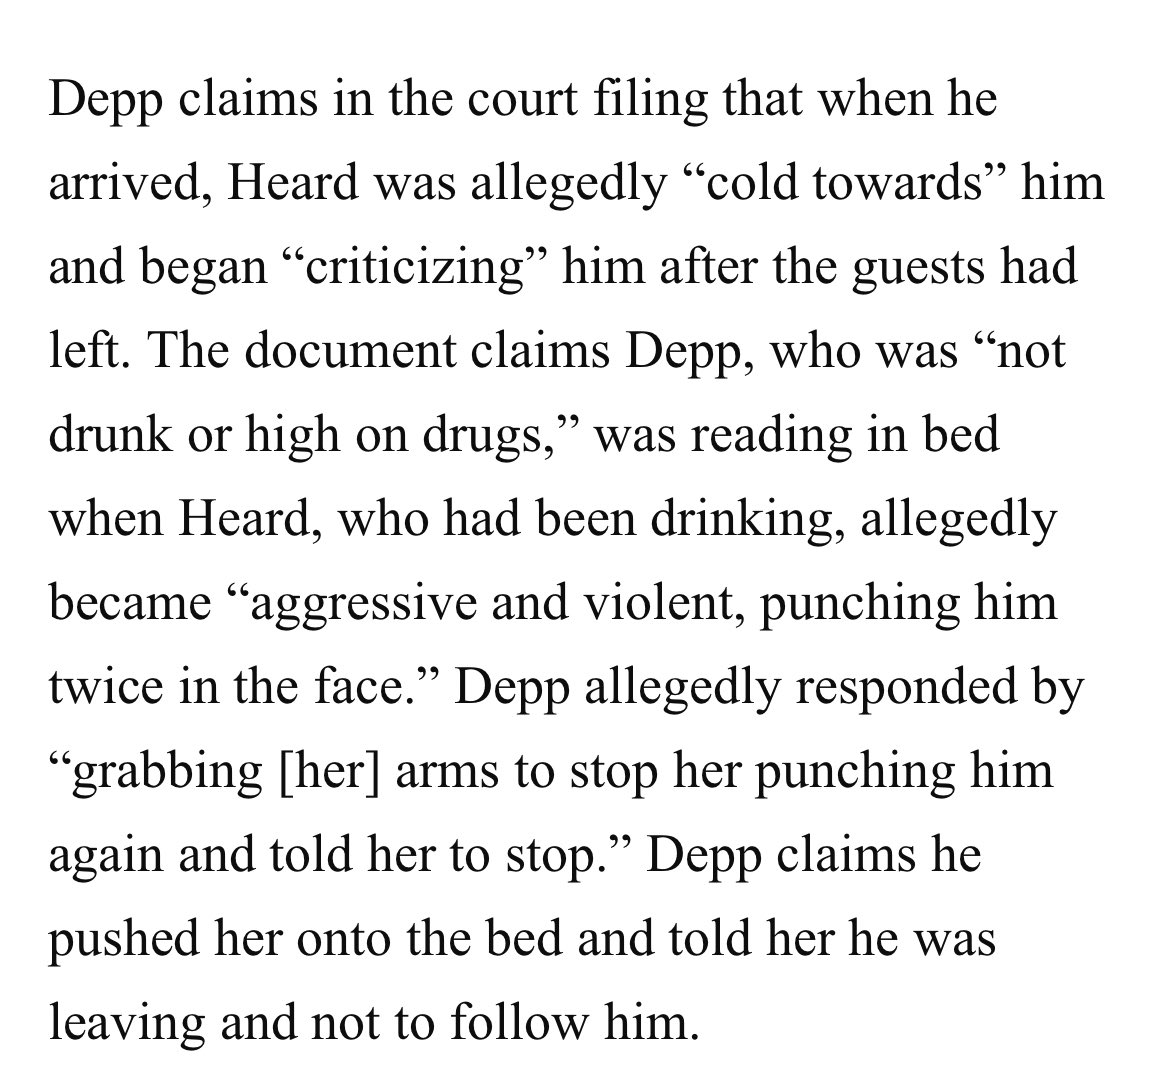 In his court filing, Depp claims after Amber confronted him about his tardiness to her birthday, she attacked him for ruining her party. He claims she punched him twice in the face. Depp submits a photo of his injury, though it’s dated March 2015, a year before the incident.